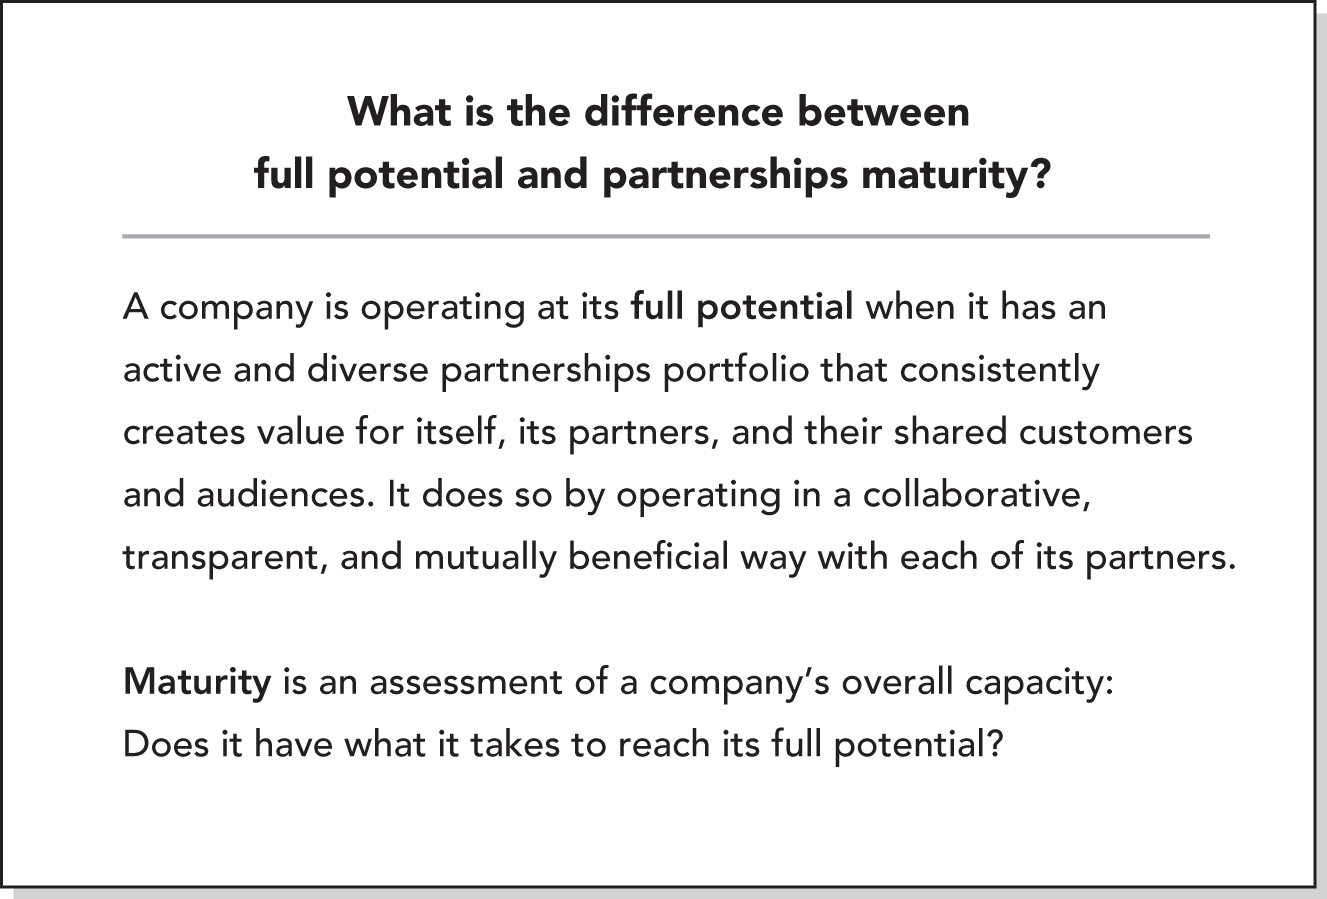 An illustration of the difference between full potential and partnerships maturity.